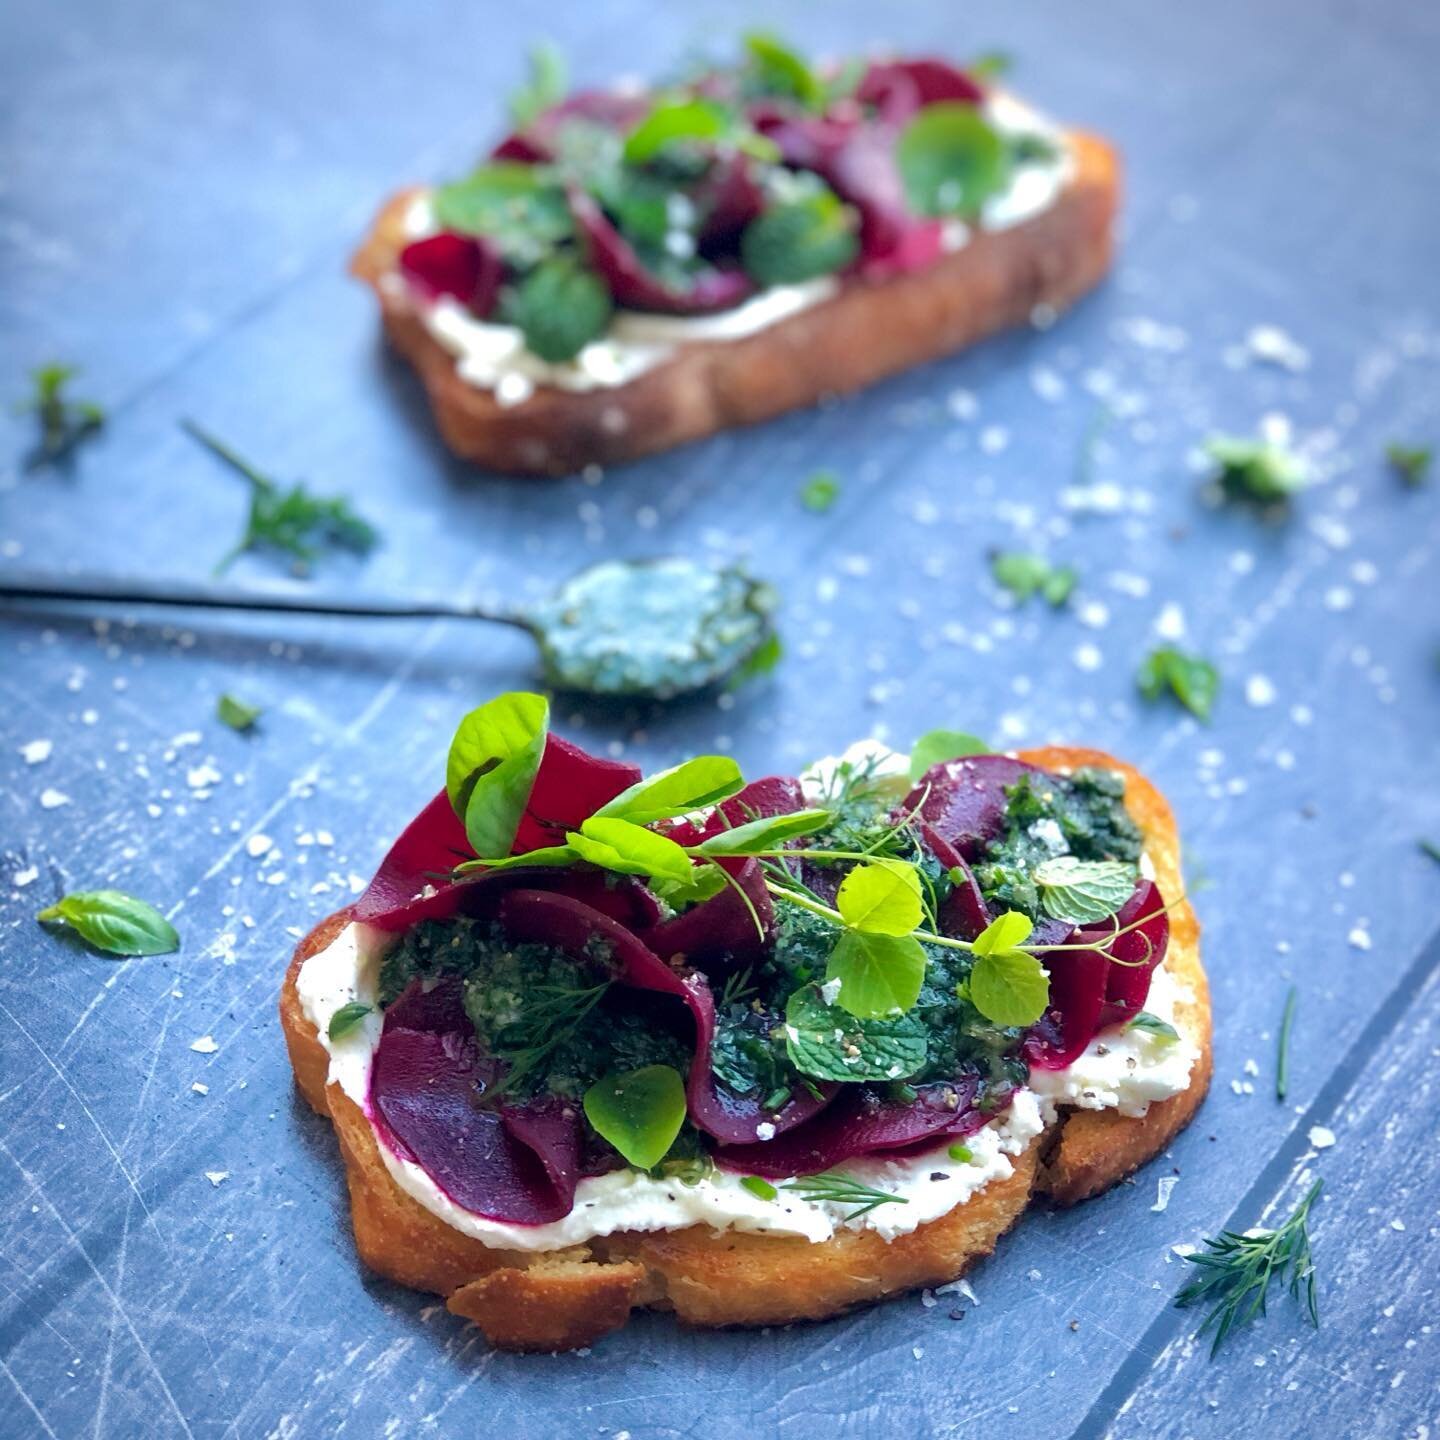 For all us Melburnians stuck in lock down and missing our cafe breakfasts, this is for you. Create your own brunch at home! 

Grilled sourdough, dill and macadamia pesto, quick pickled beets and Meredith goats cheese.
@cookrepublic @kulsumkanwa @ecru